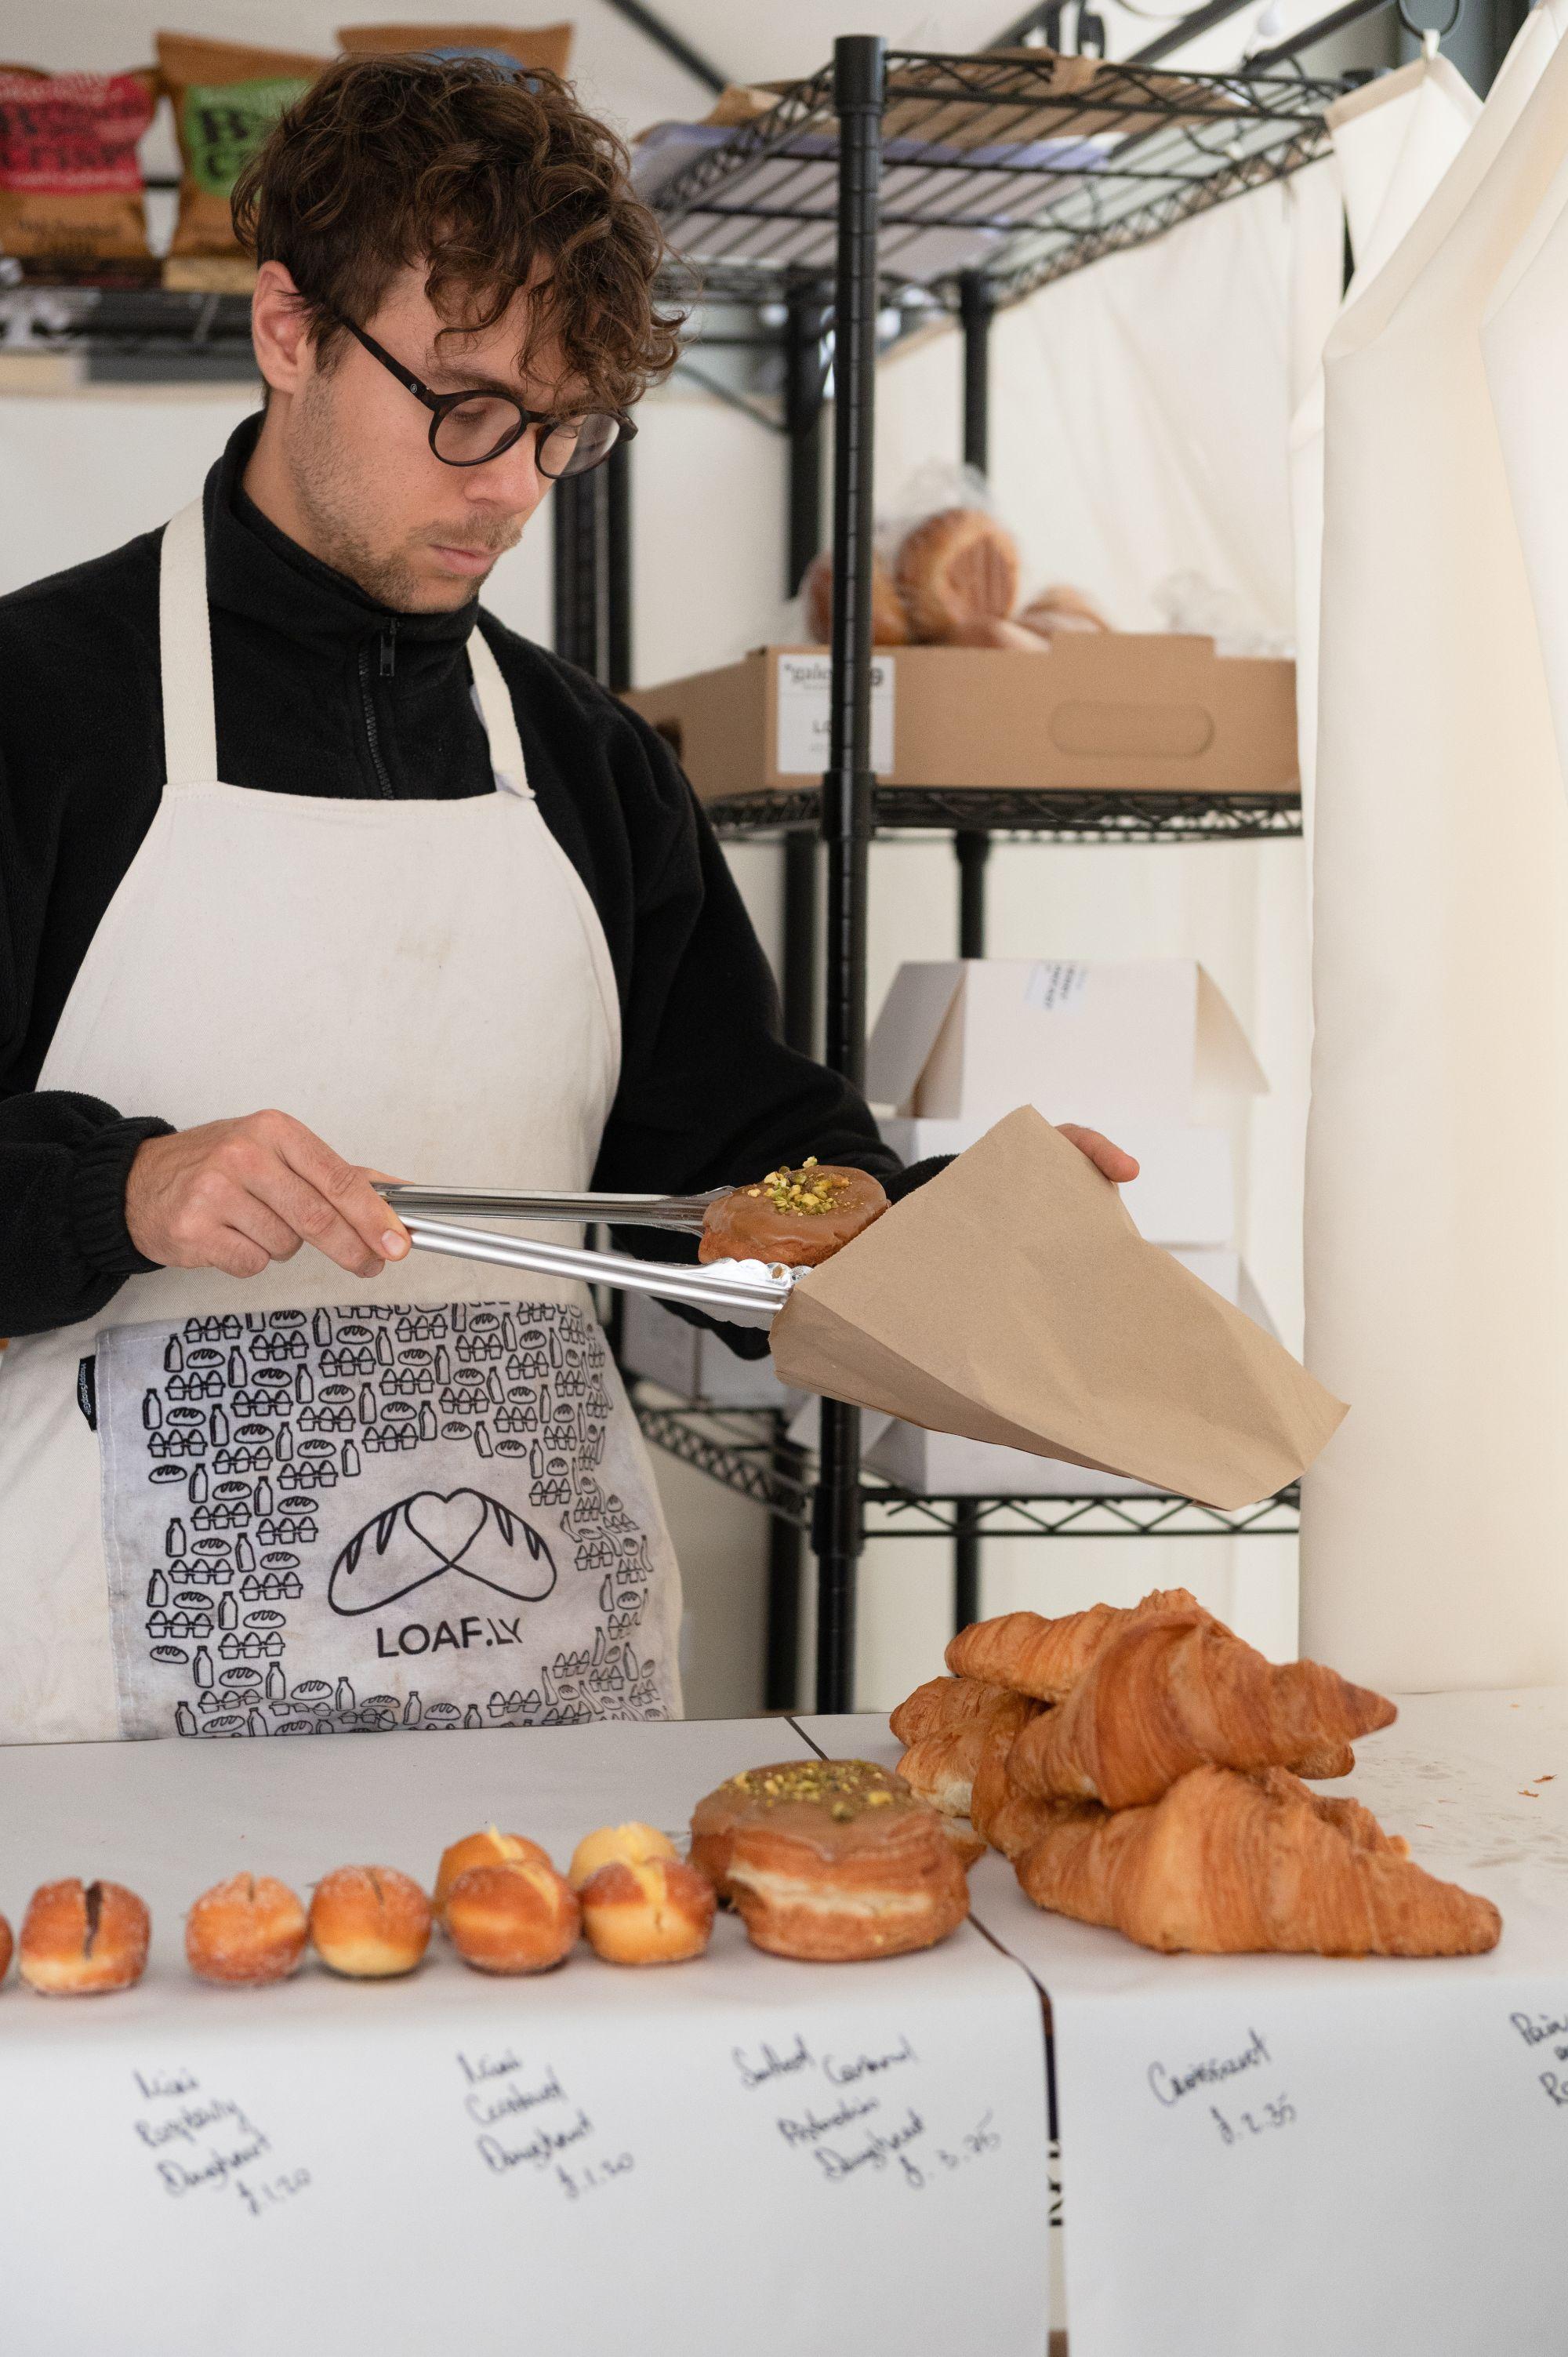 Pastries being put in a bag by a loafly employee